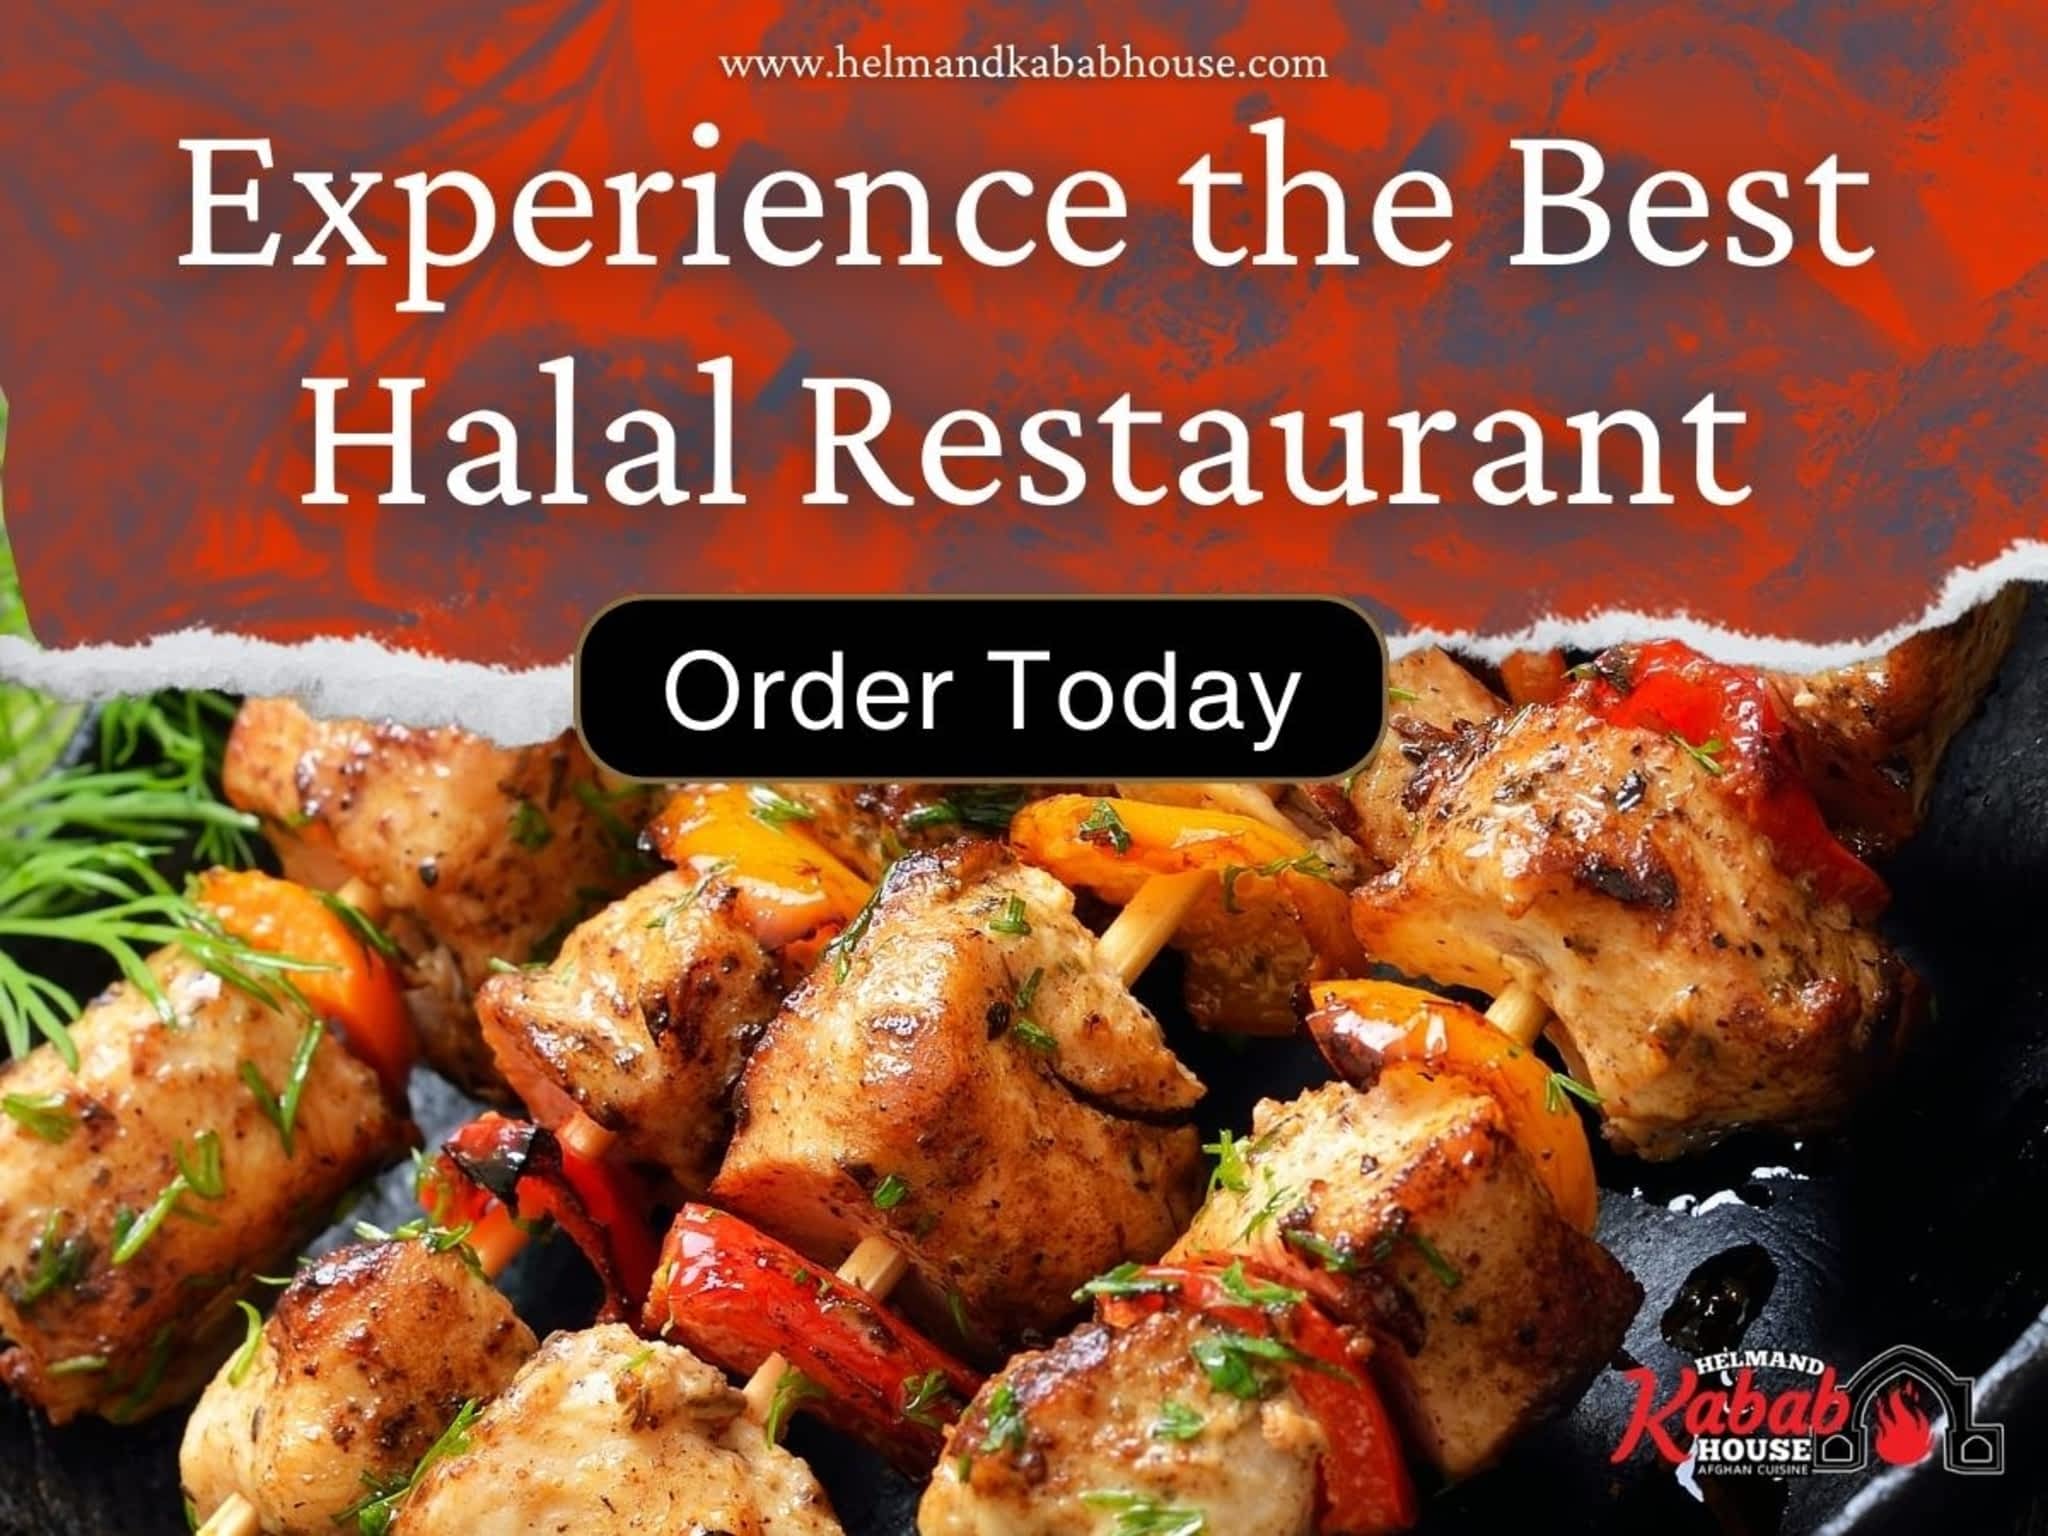 photo Helmand Kabab House - Guelph